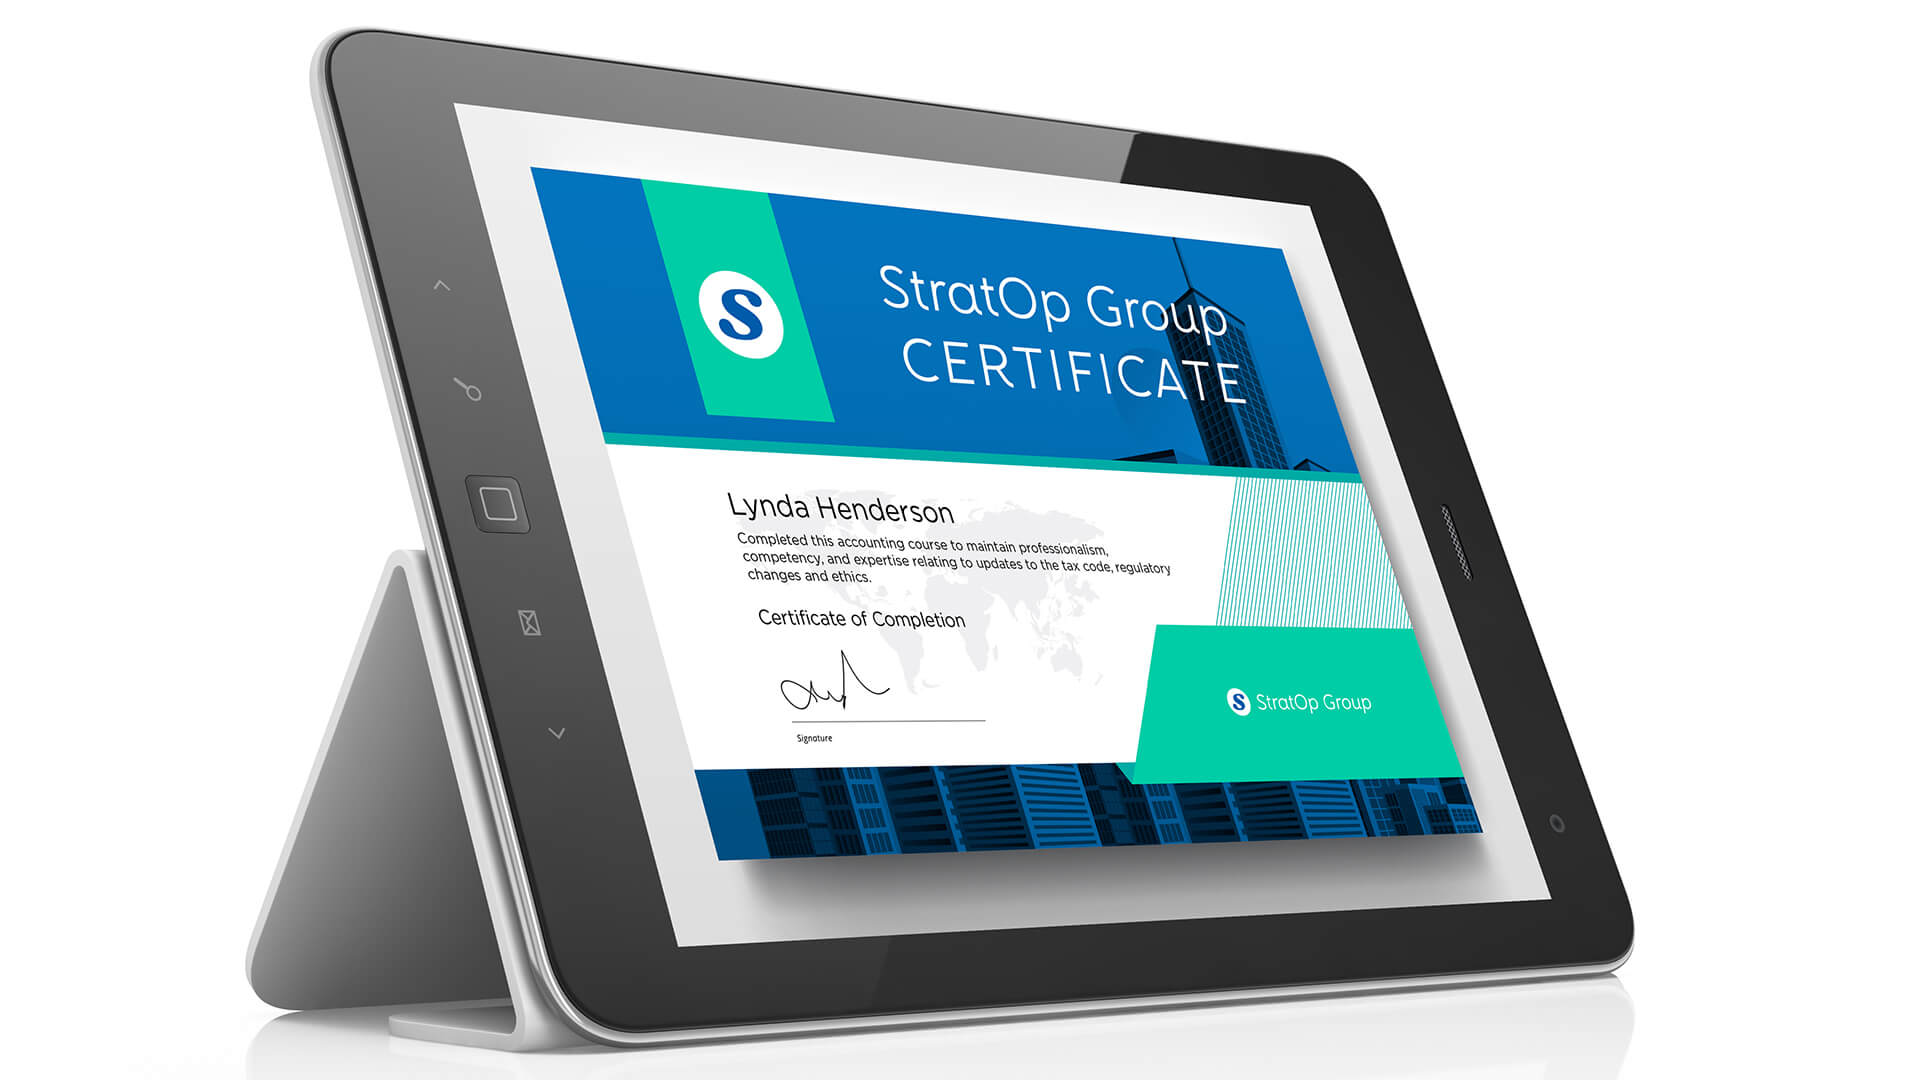 iPad viewpoint of a signed and completed certificate